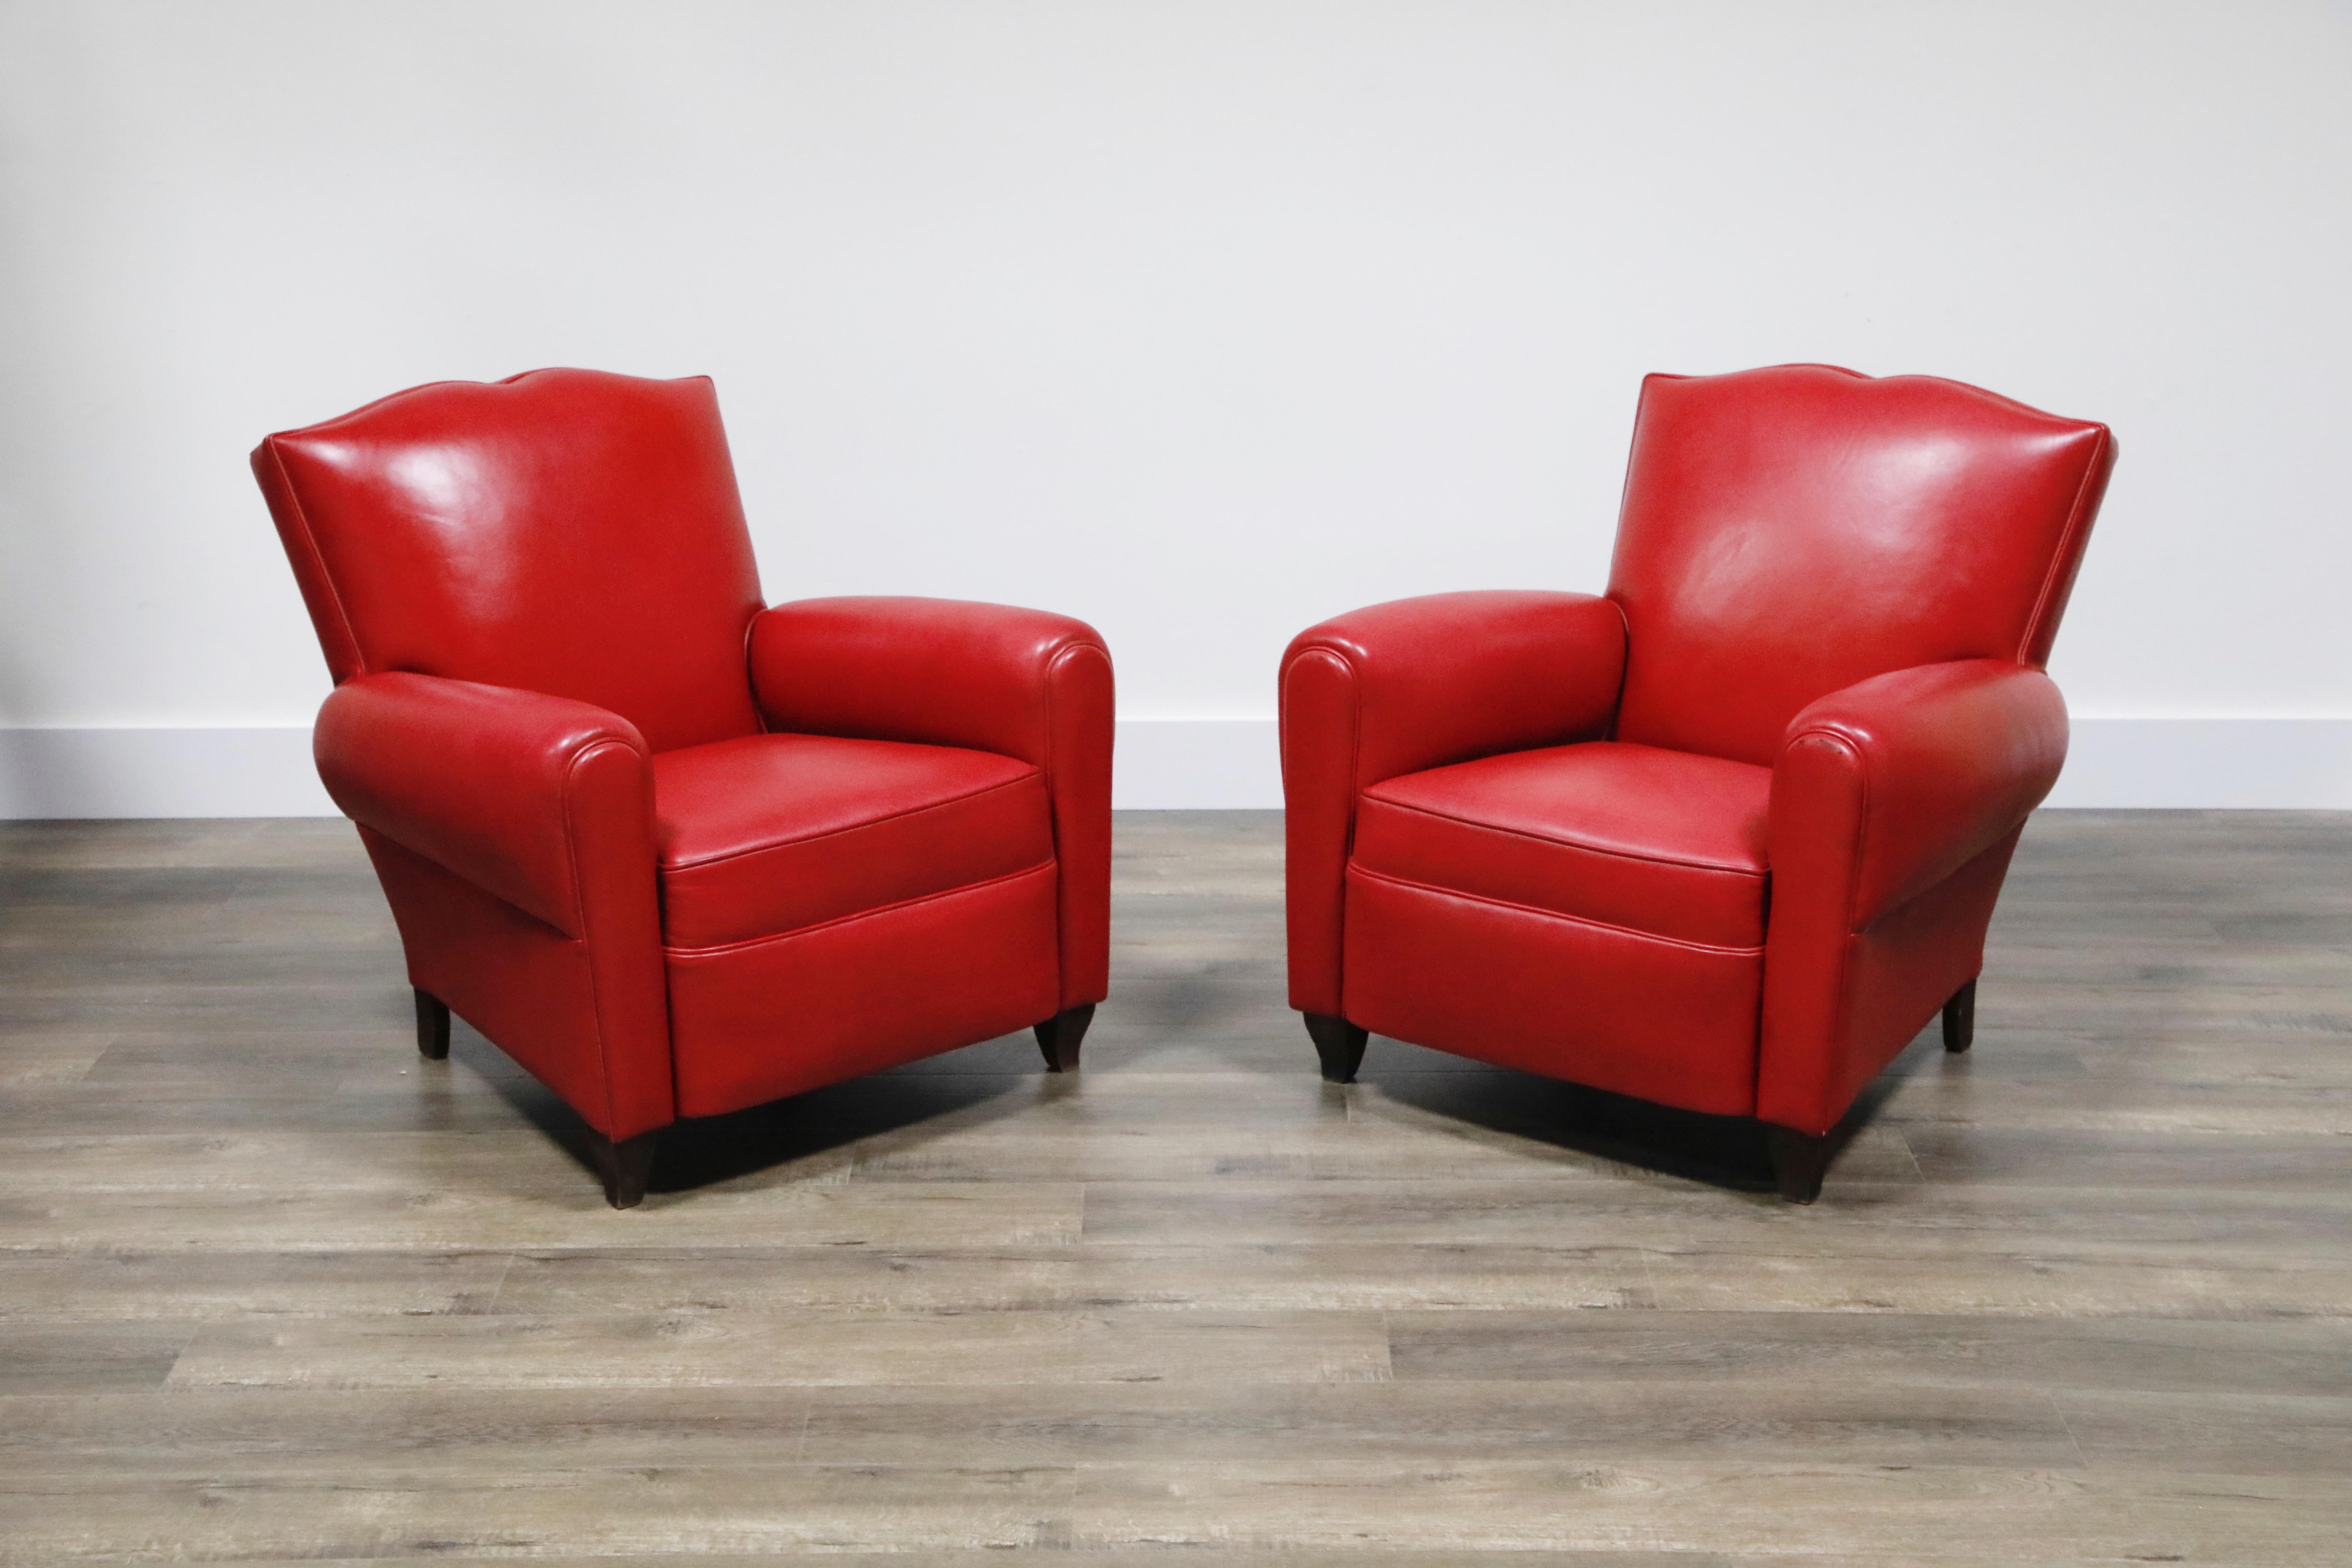 American Red Leather Art Deco Mustache Club Chairs, Pair